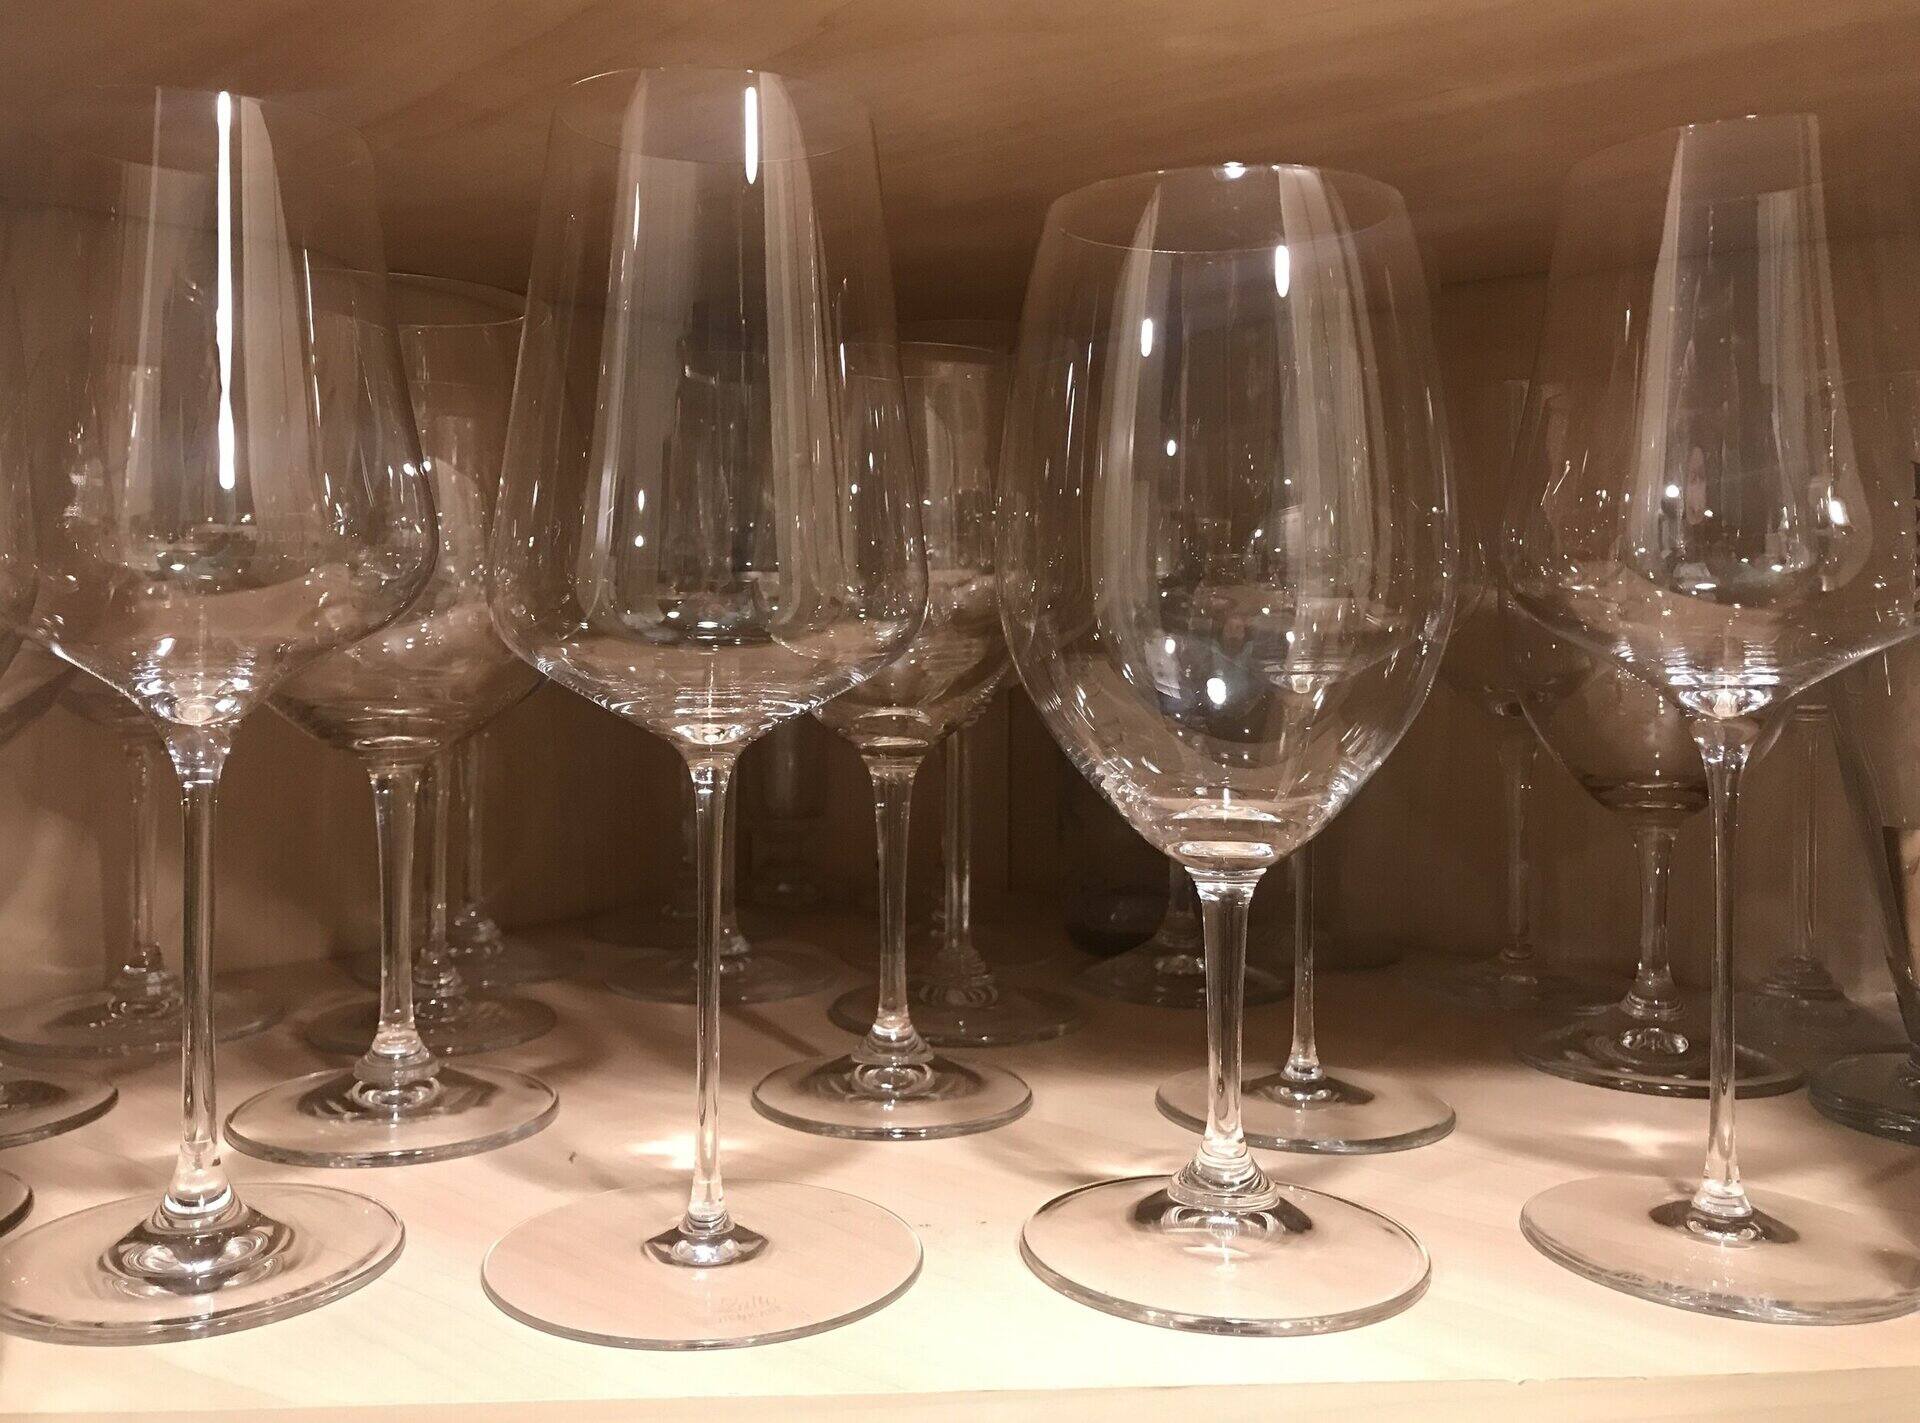 Where Should Glassware Be Stored After Cleaning